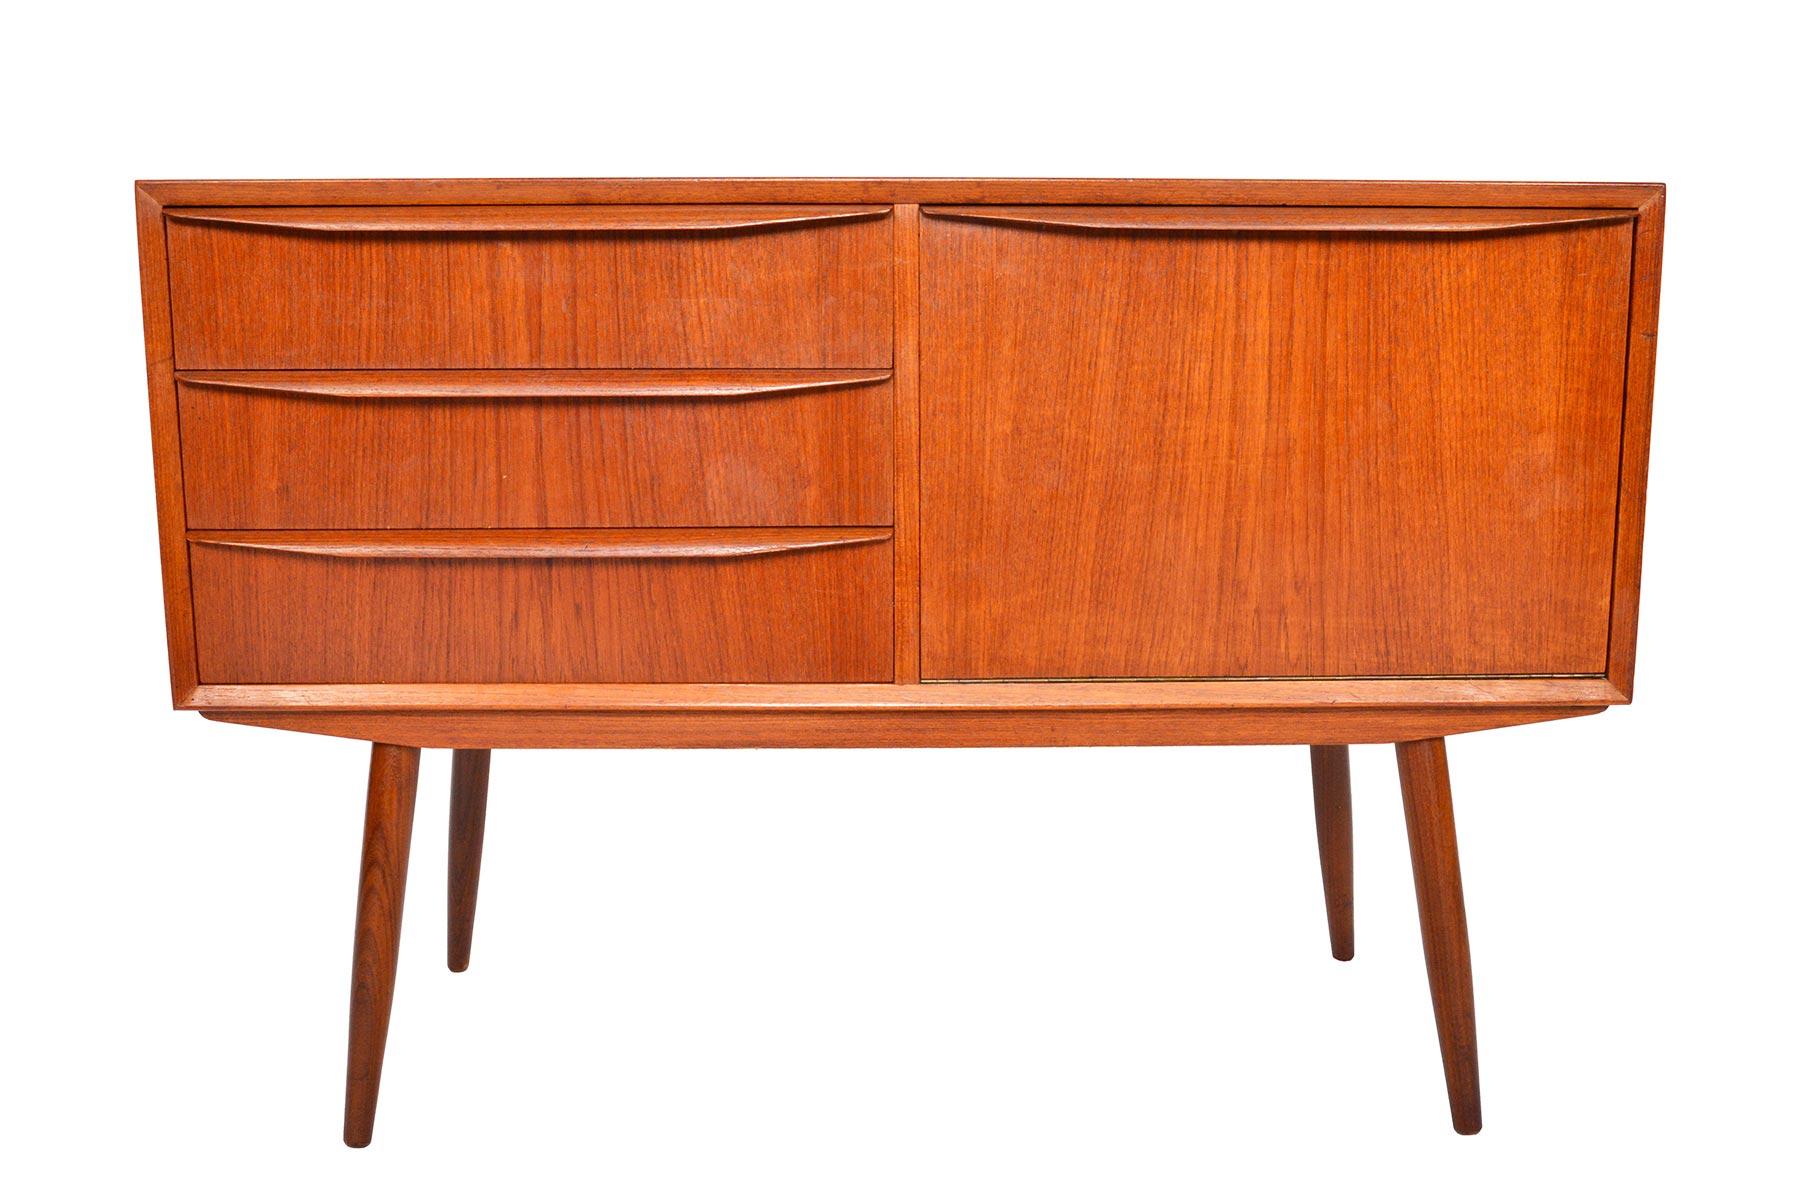 Small and beautifully detailed, this Danish modern teak credenza offers compact storage for the modern home. A bank of three drawers with full profile pulls sits to the left of a drop down cubby. Case stands on canted spindle legs. In excellent